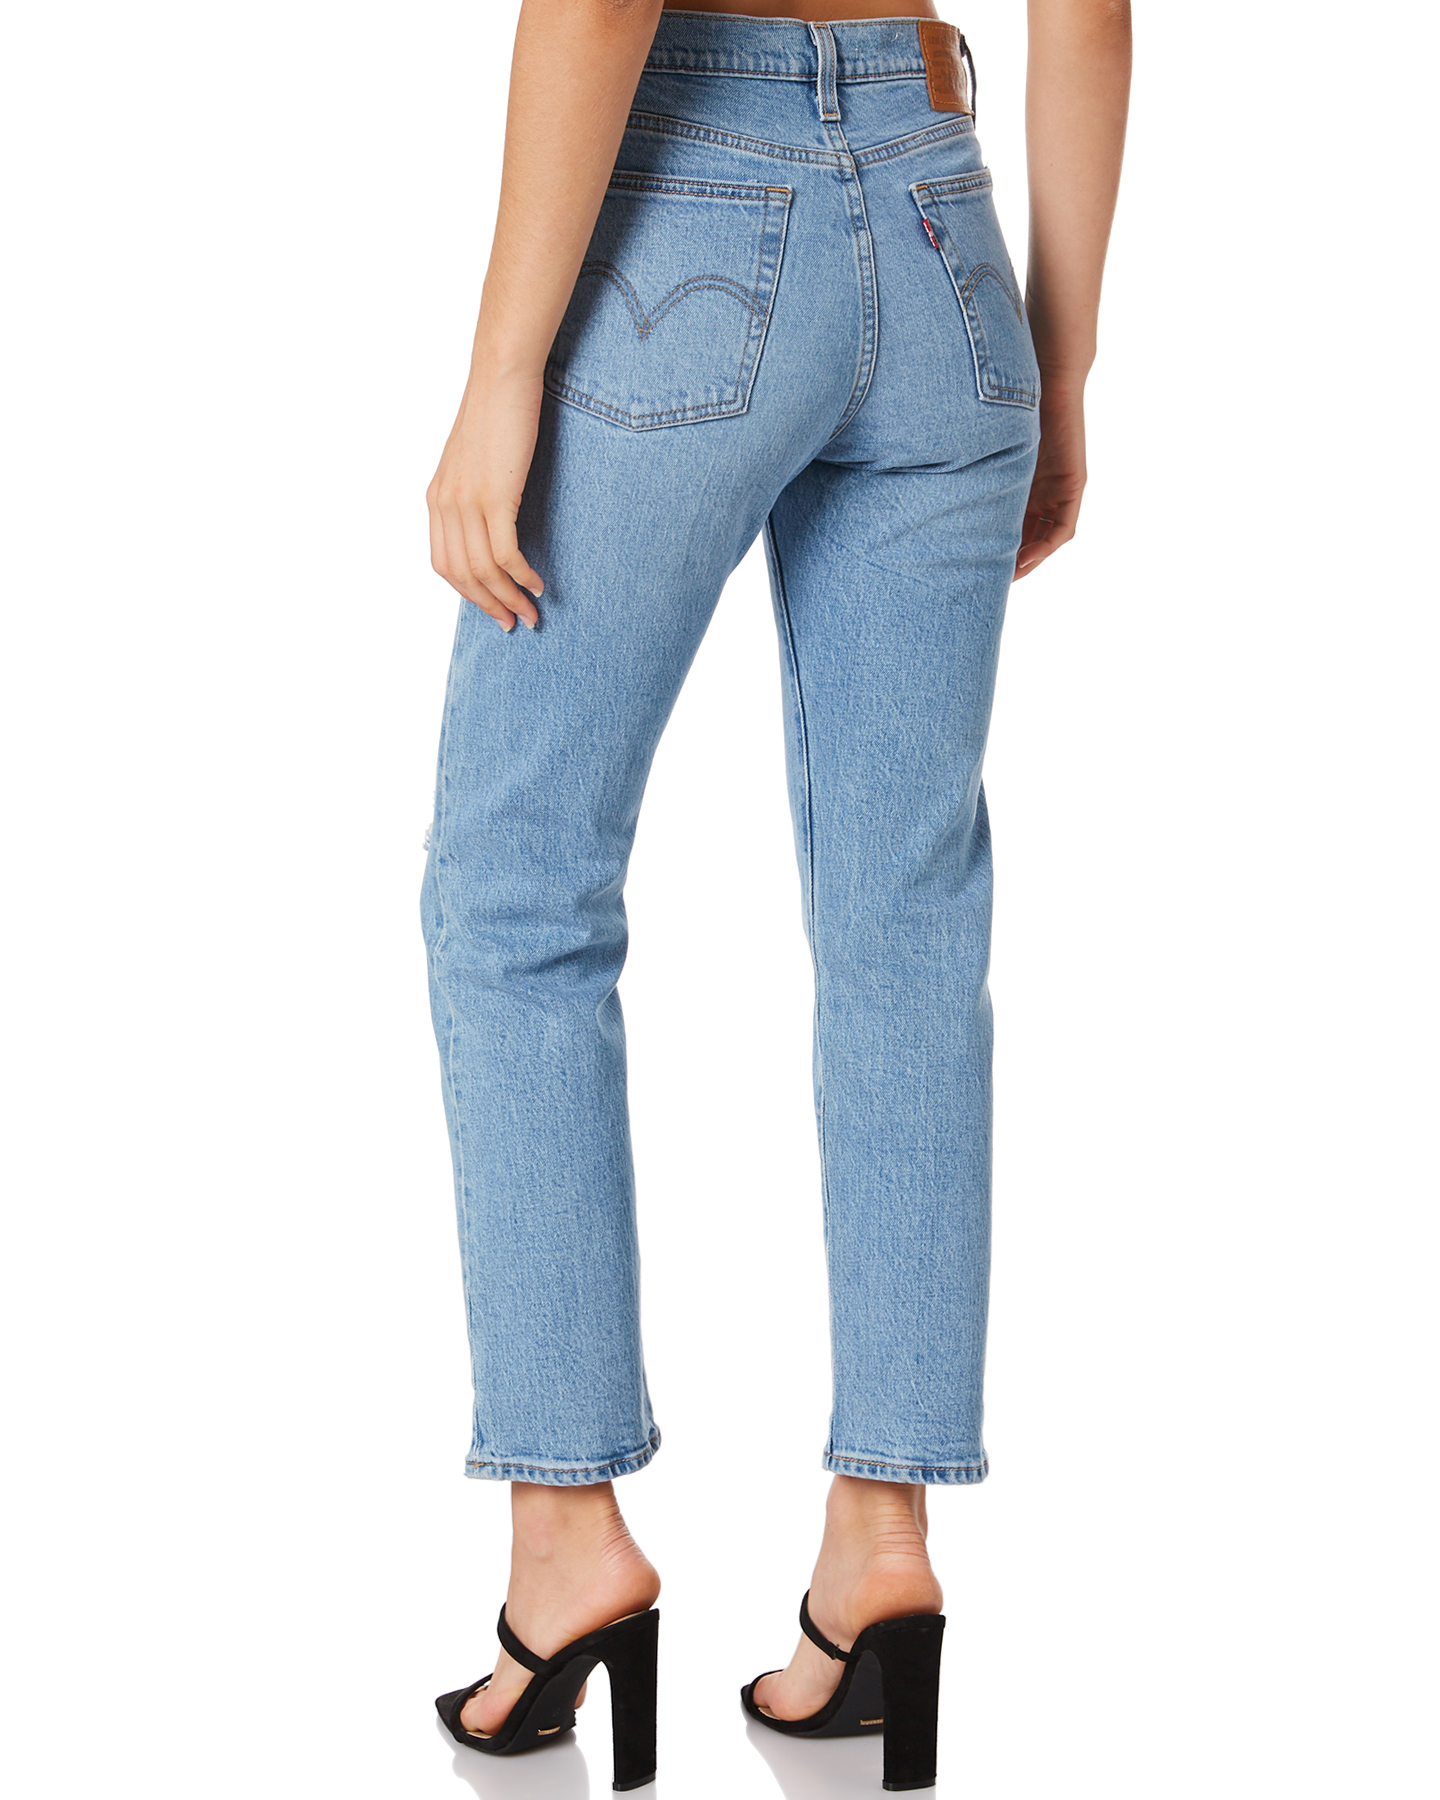 Levi's Women's Wedgie Skinny Jeans Clearance Price, Save 54% | jlcatj ...